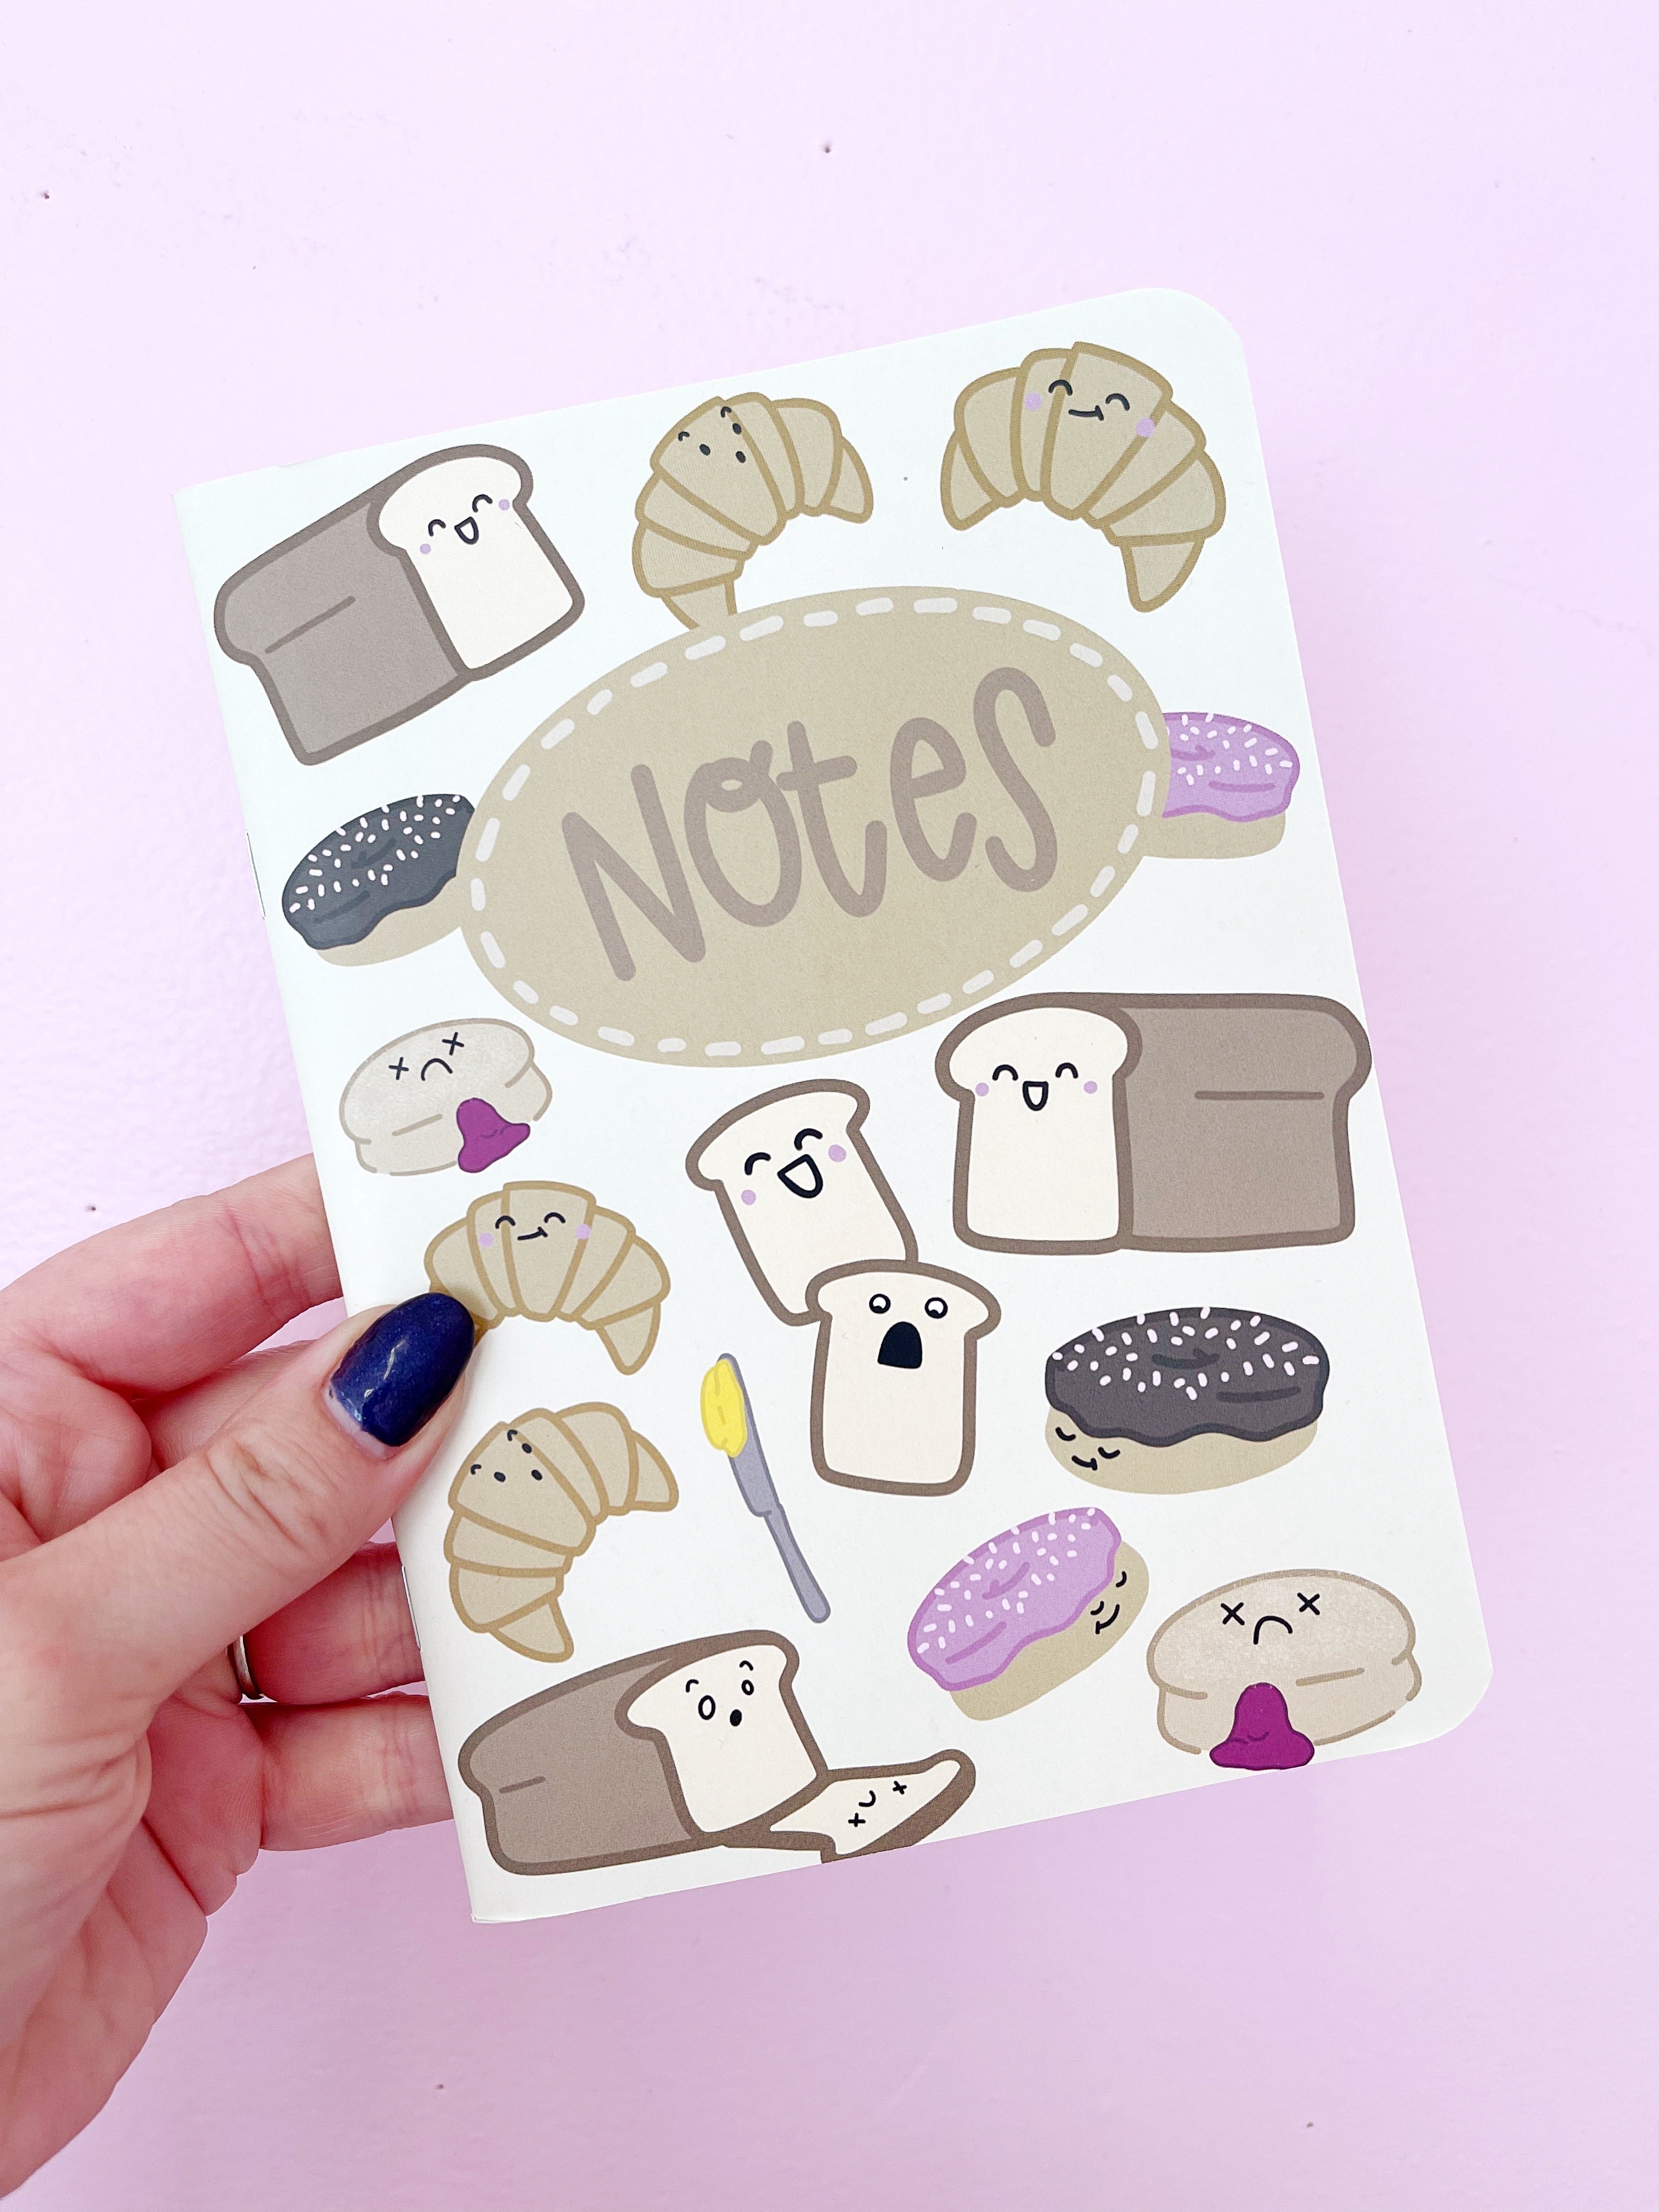 Image of notebook cover with cream background and images of bread, croissants, donuts and slices of bread with tan text says, "Notes". 